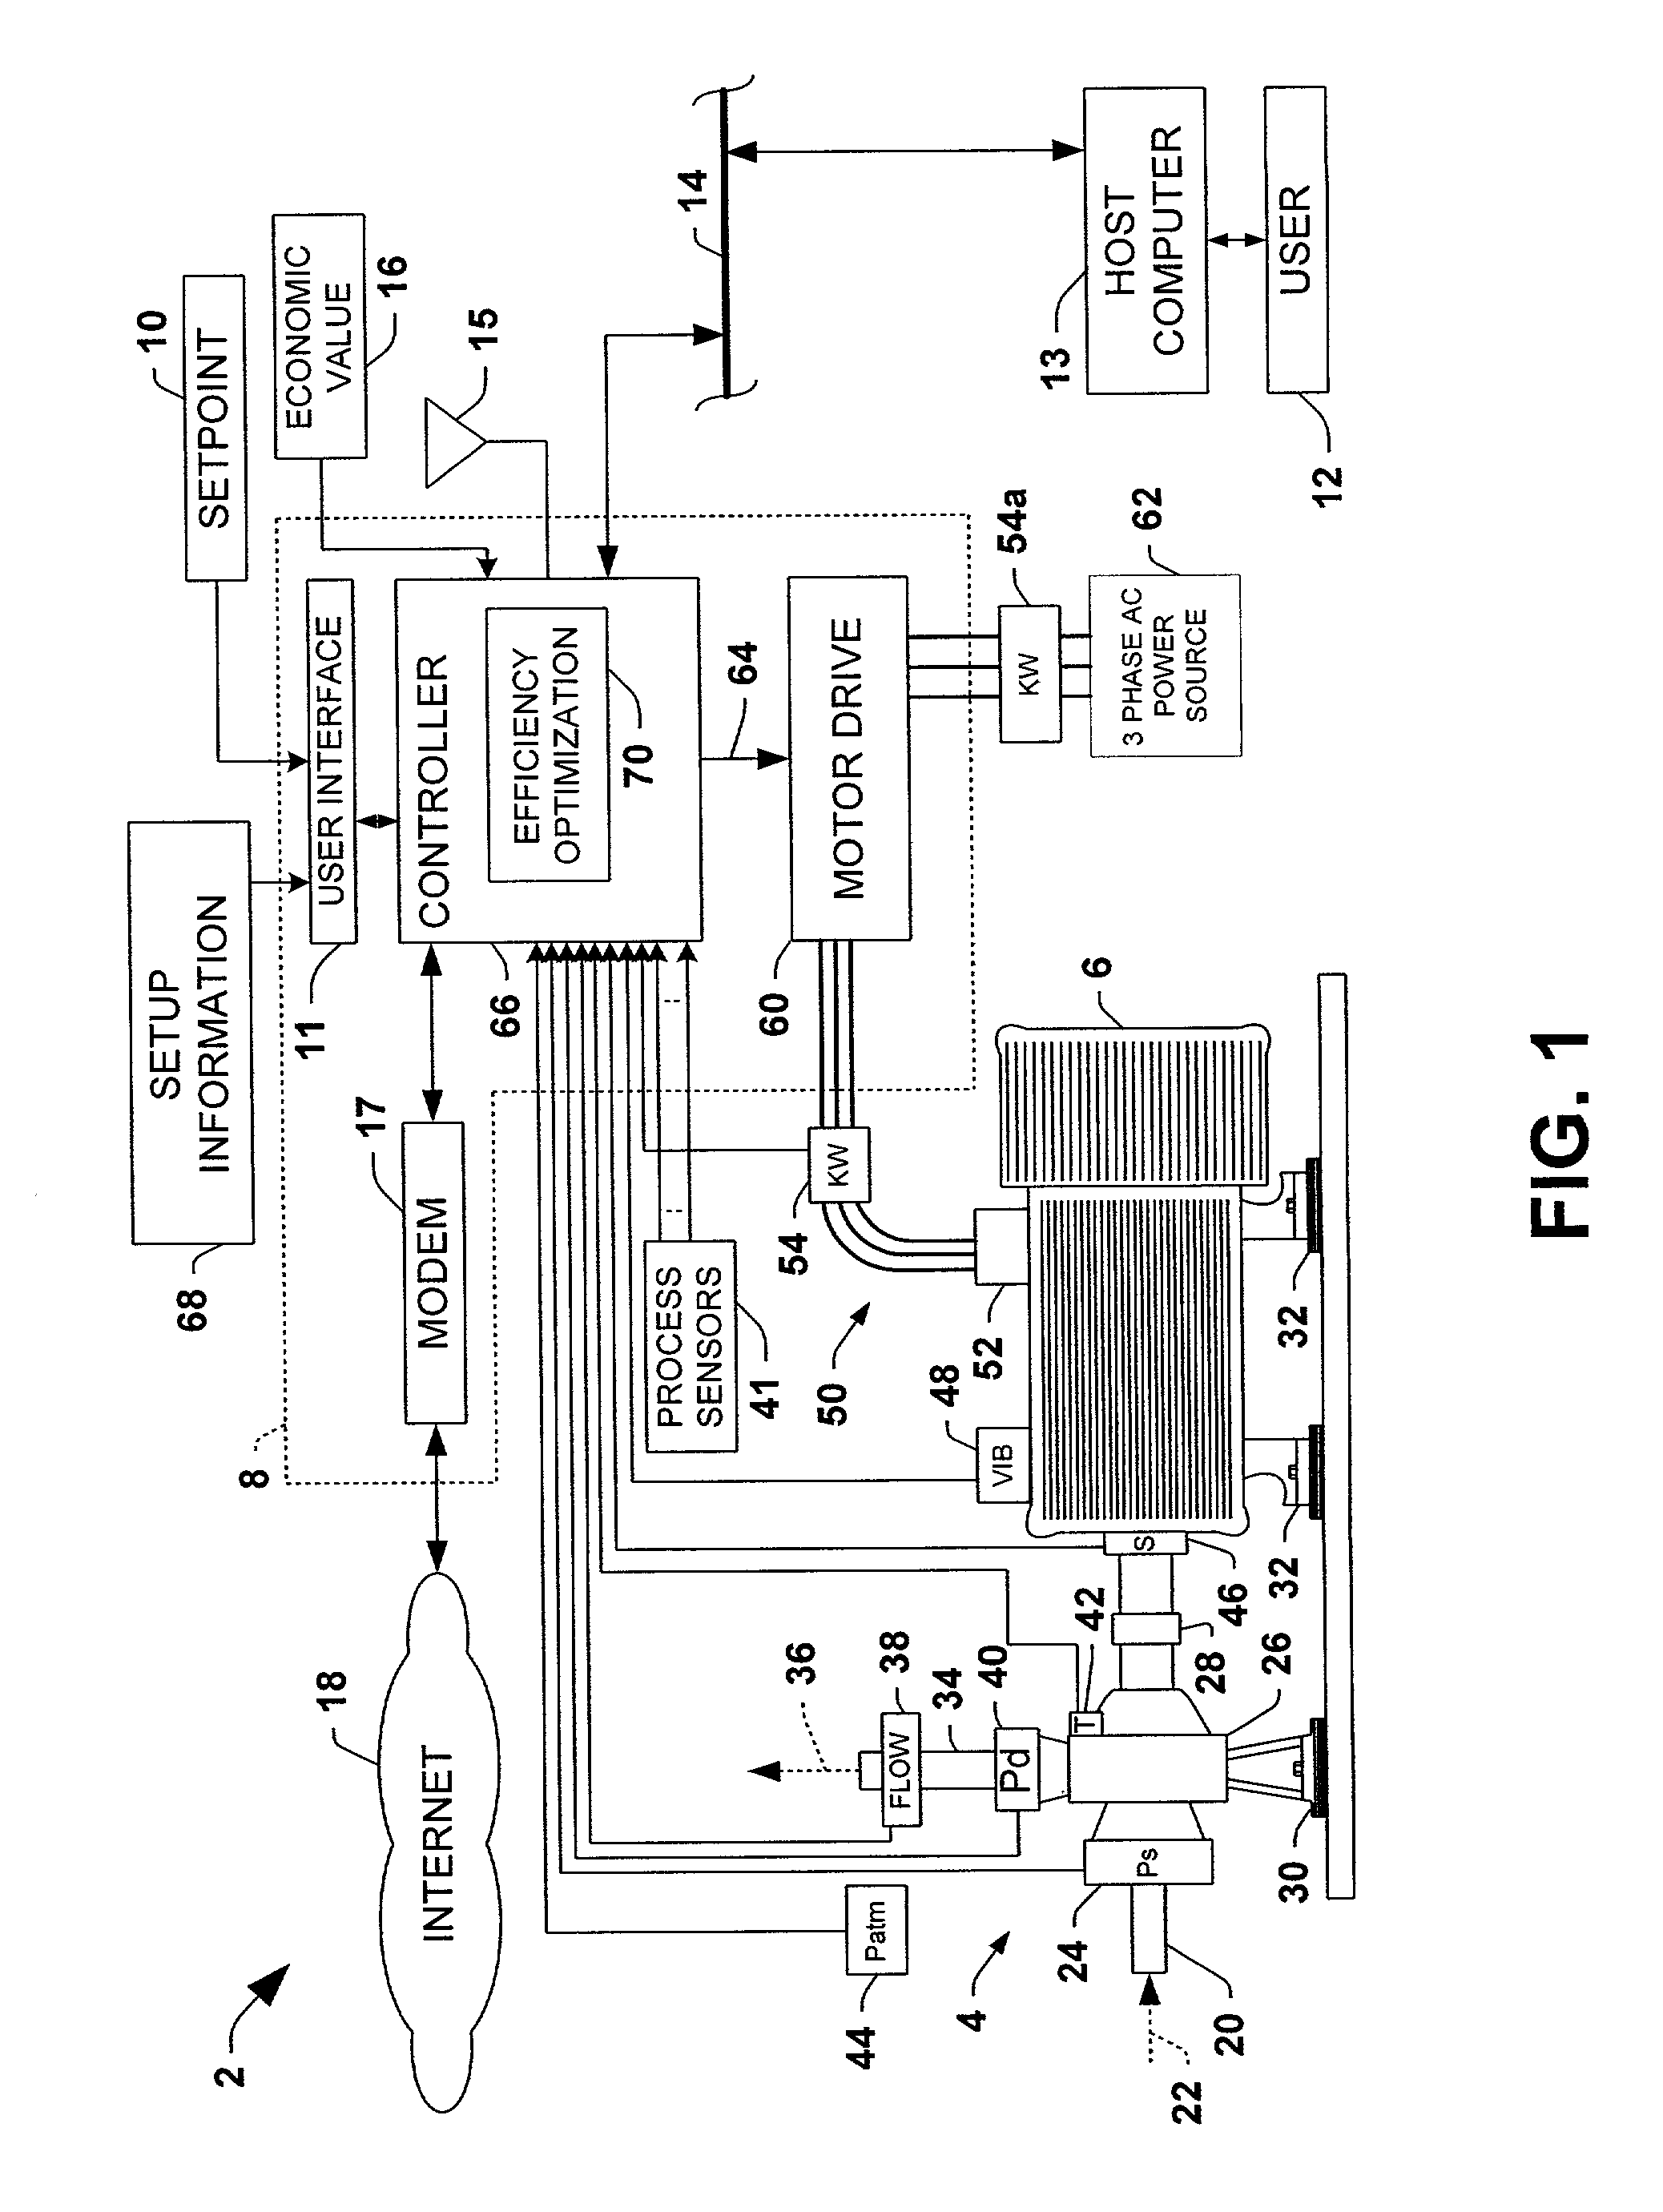 System and method for dynamic multi-objective optimization of pumping system operation and diagnostics